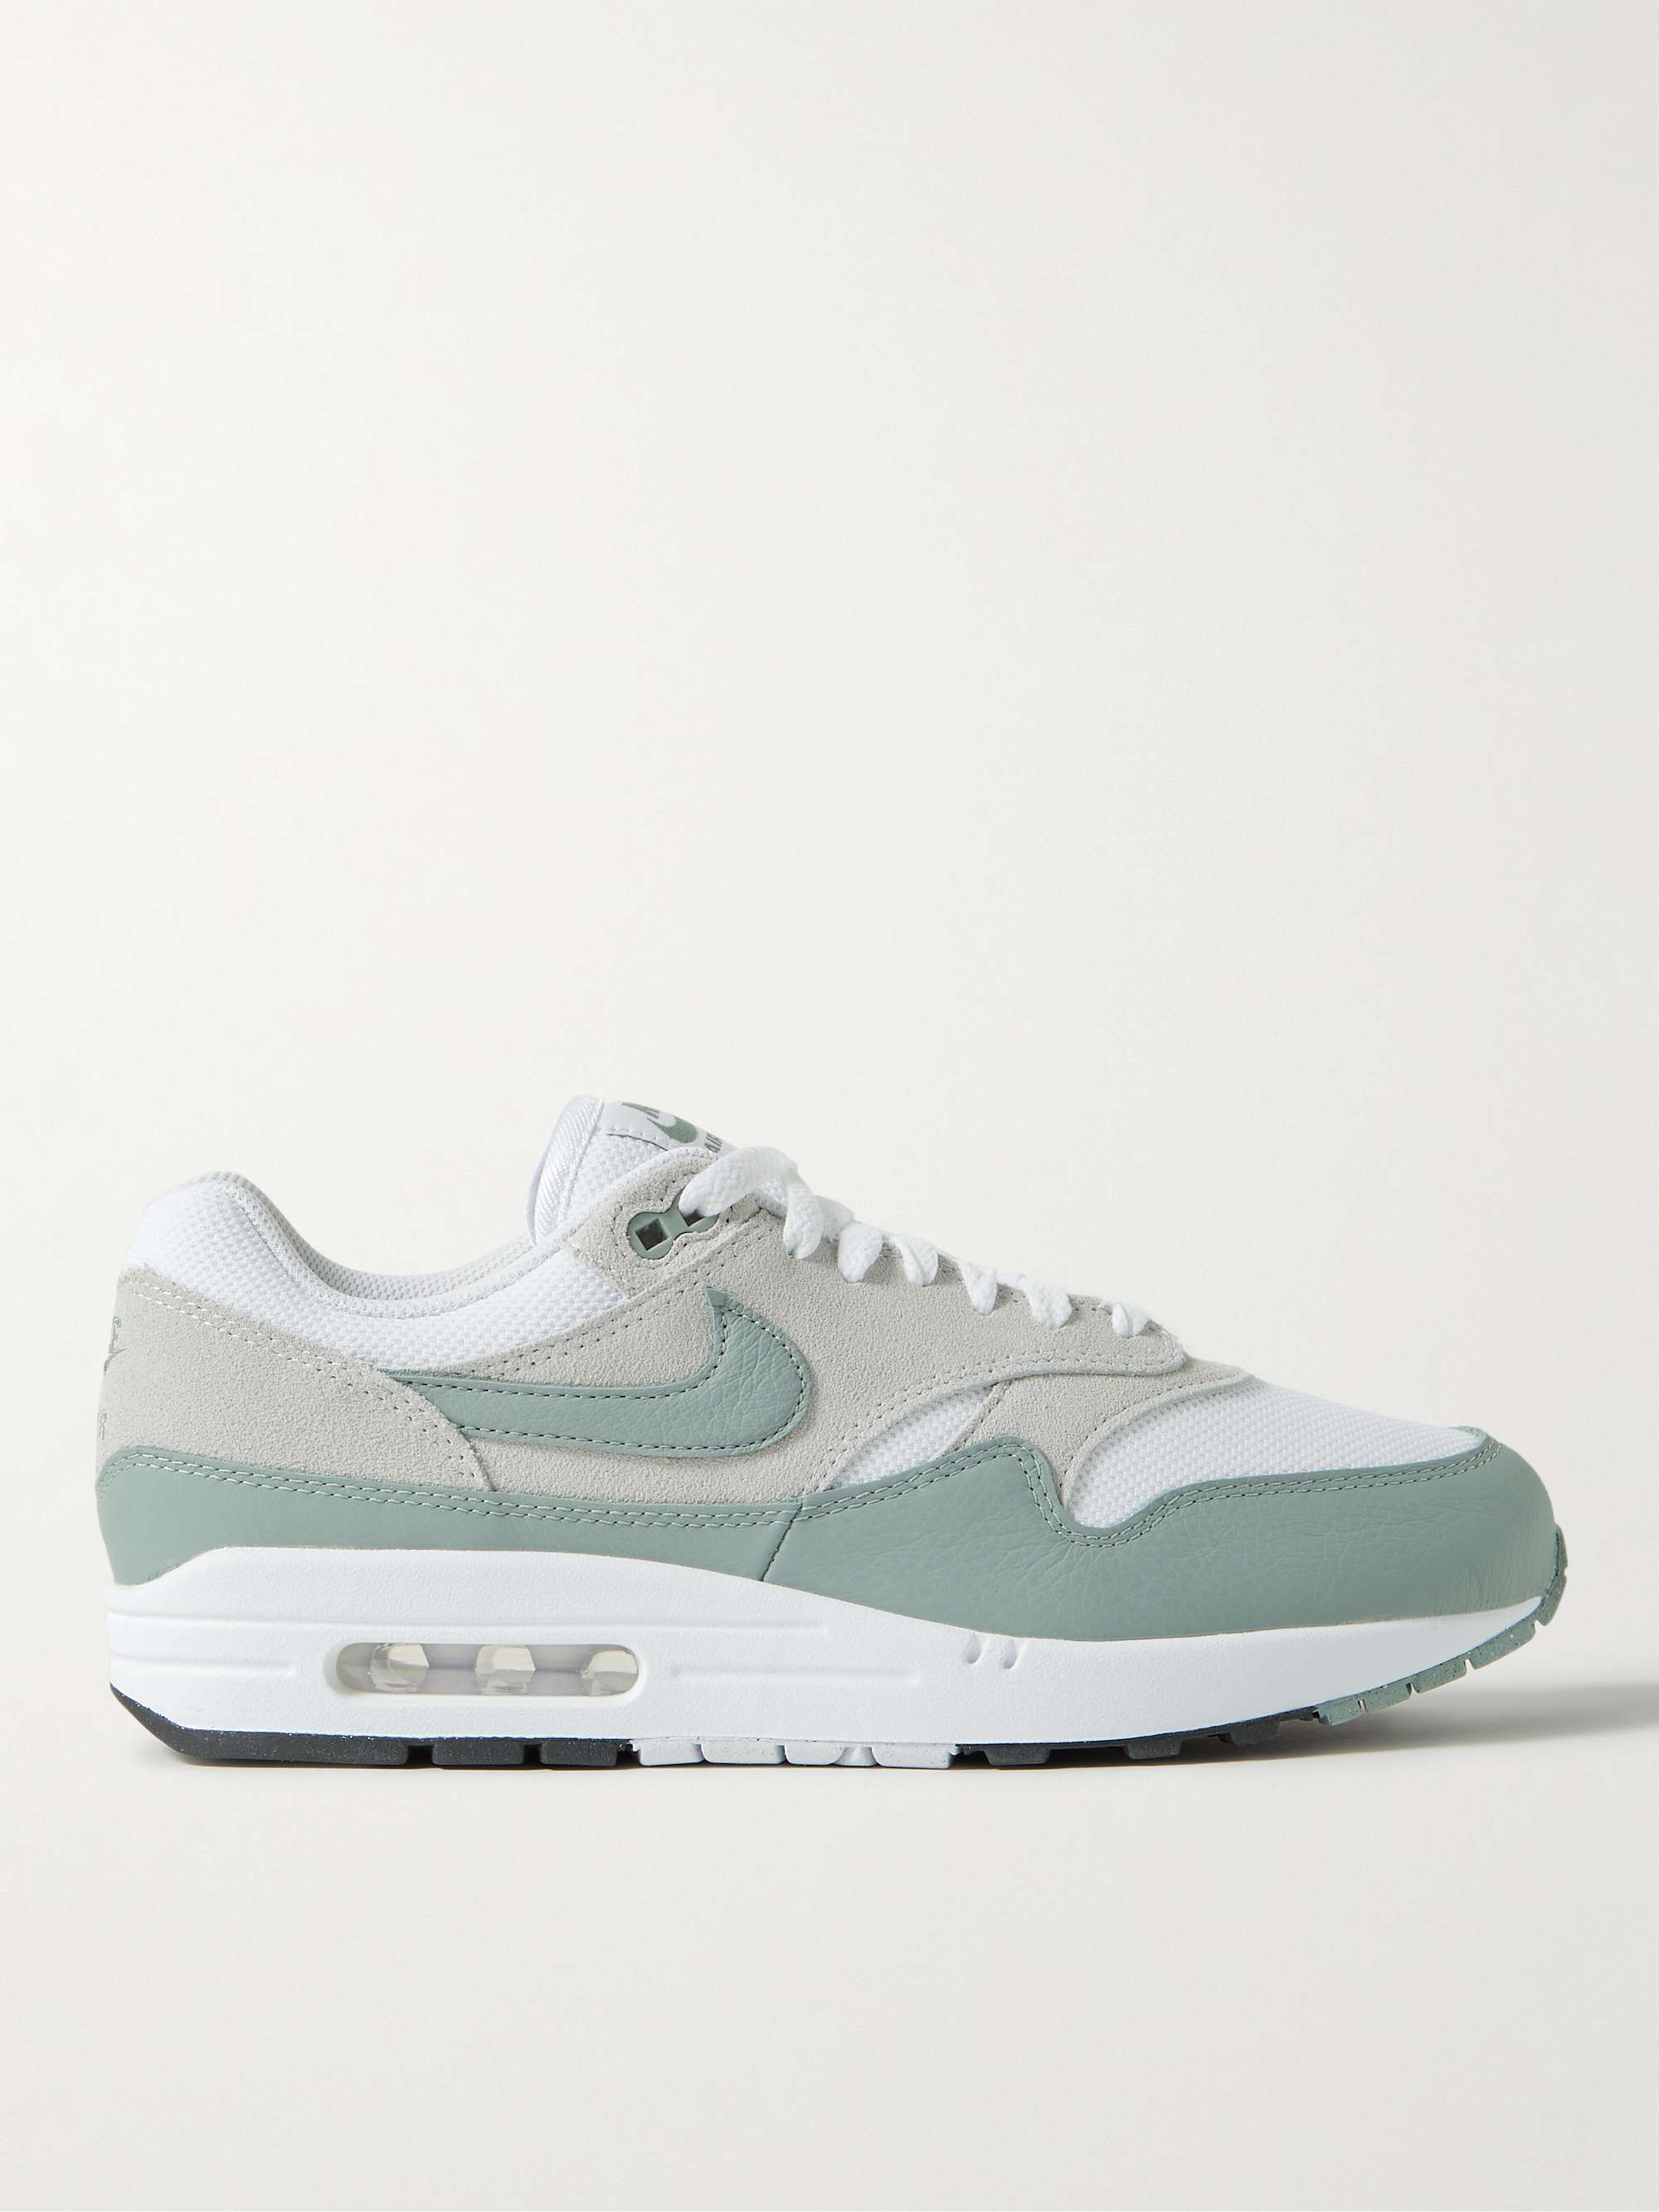 pago Reconocimiento Gran universo NIKE Air Max 1 SC Suede, Mesh and Leather Sneakers for Men | MR PORTER